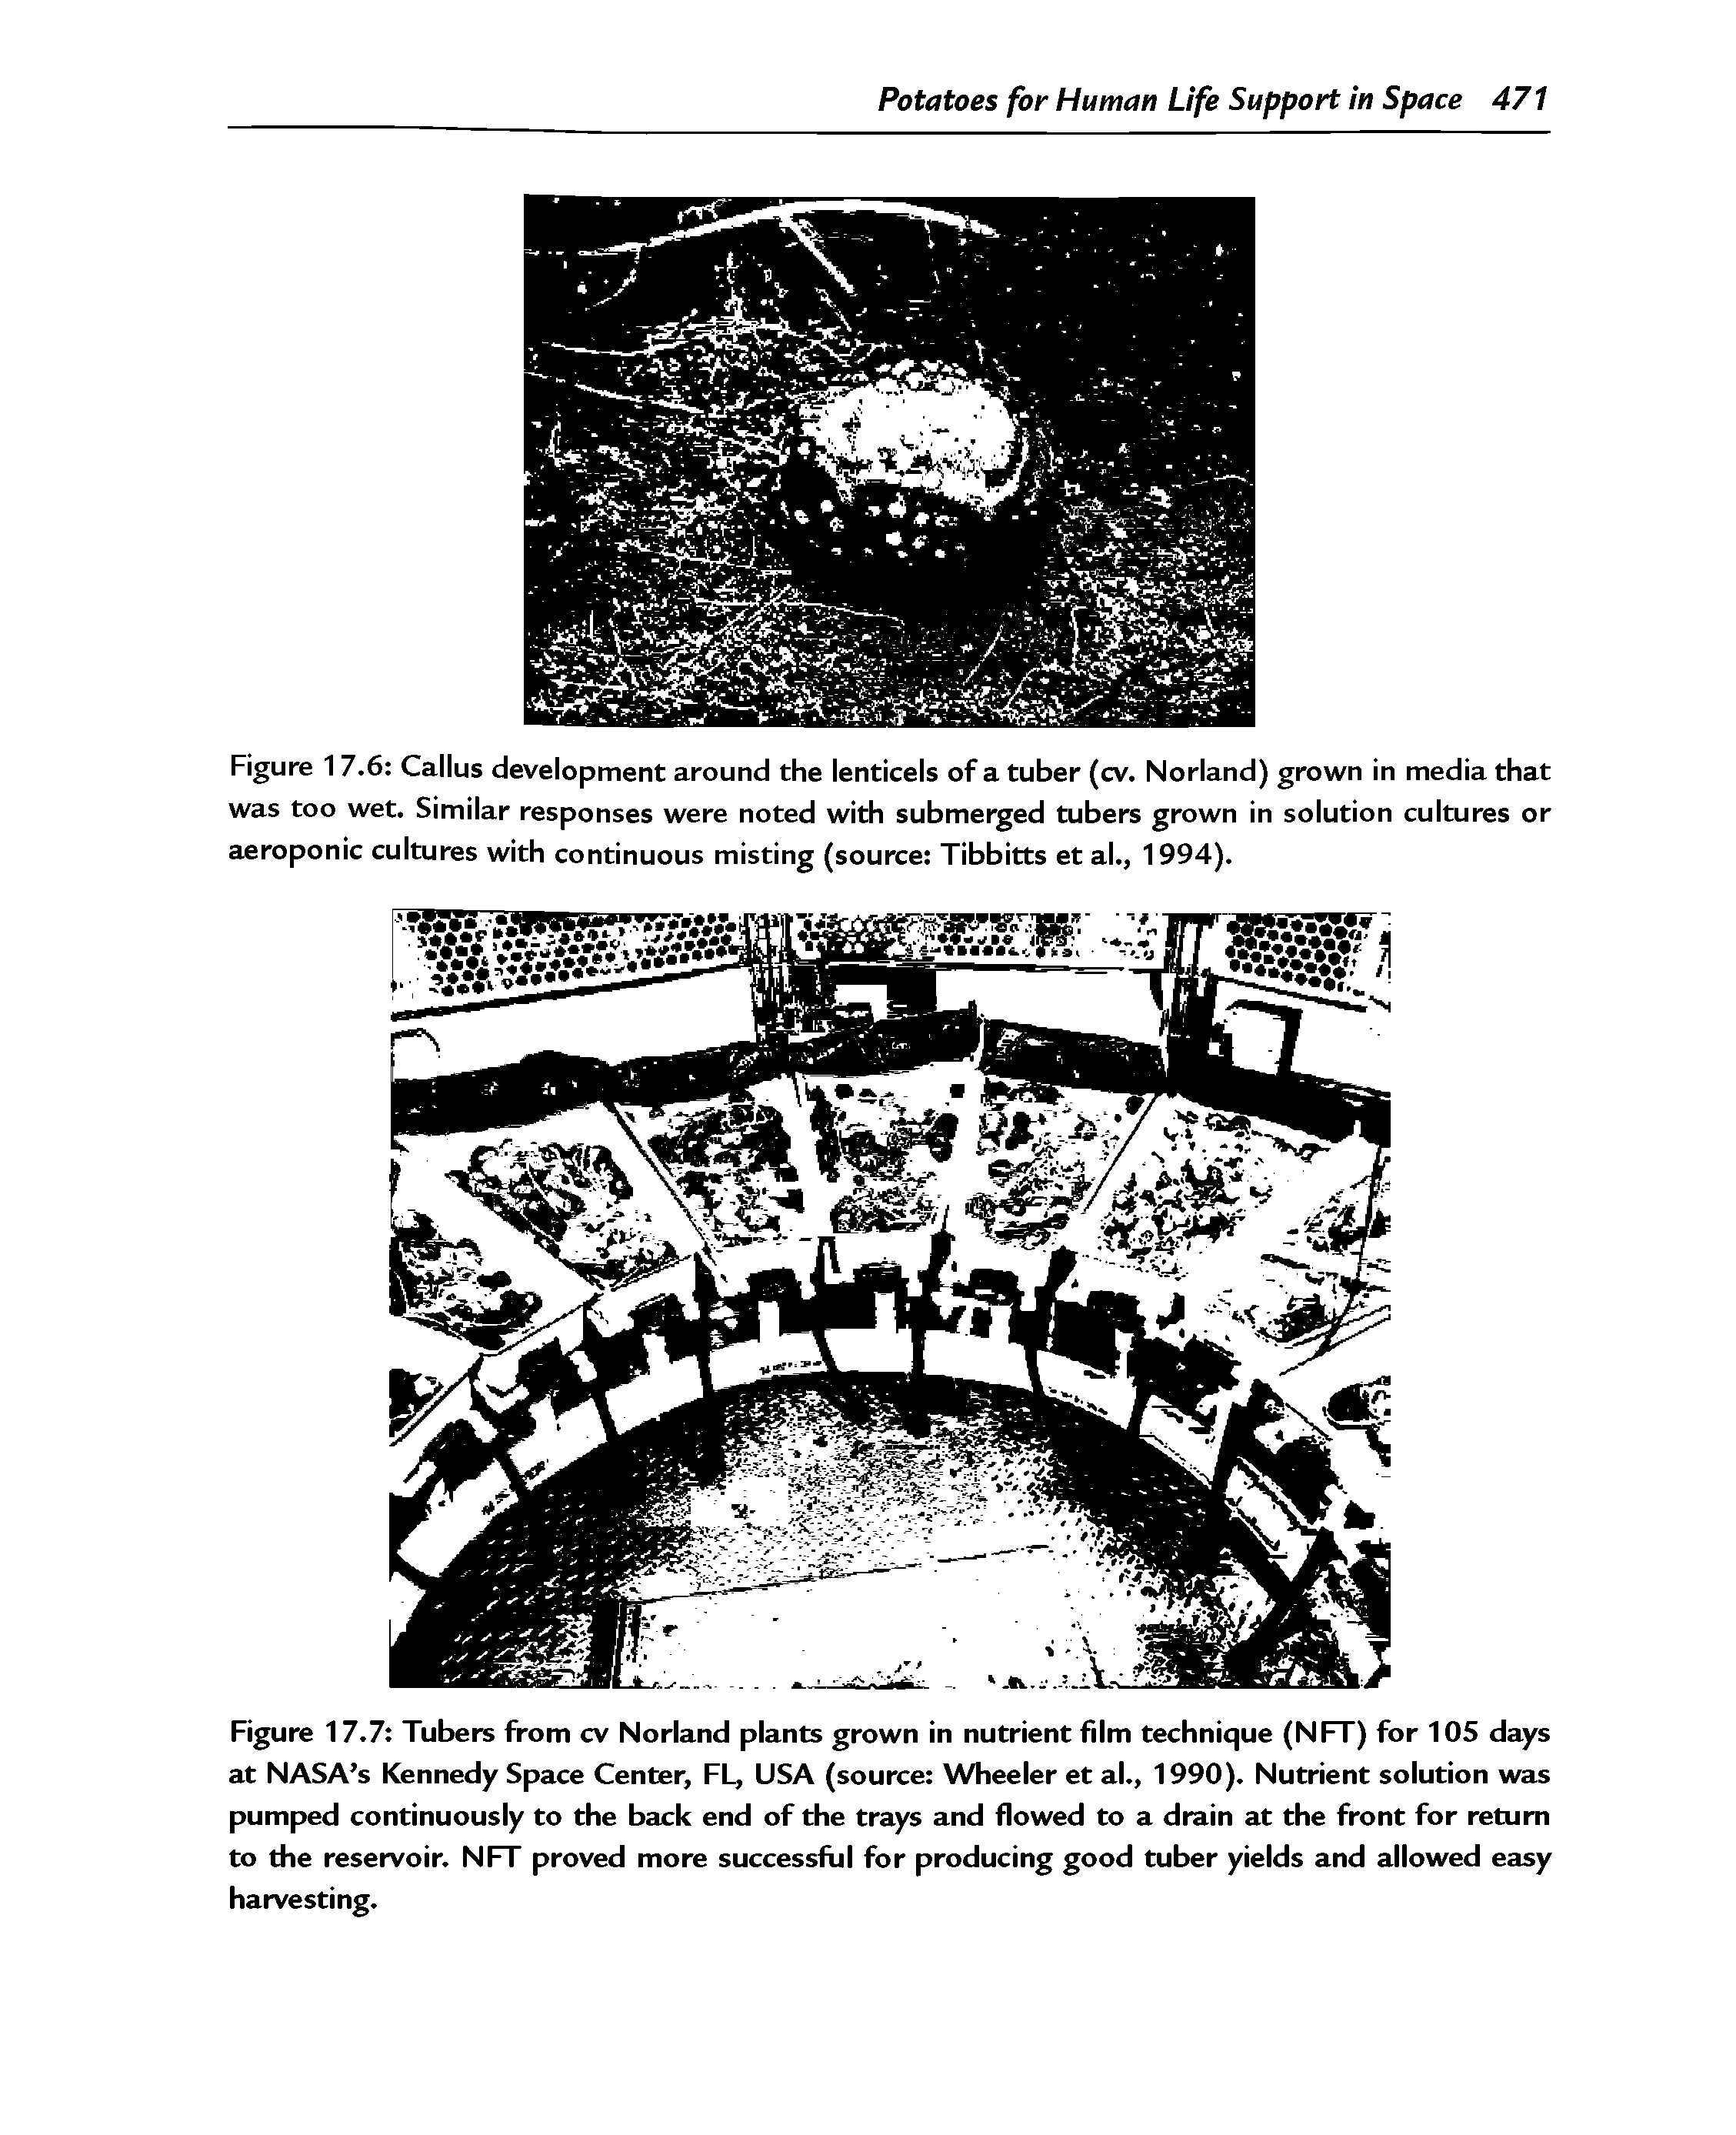 Figure 17.7 Tubers from cv Norland plants grown in nutrient film technique (NFT) for 105 days at NASA s Kennedy Space Center, FL, USA (source Wheeler et al., 1990). Nutrient solution was pumped continuously to the back end of the trays and flowed to a drain at the front for return to the reservoir. NFT proved more successful for producing good tuber yields and allowed easy harvesting.